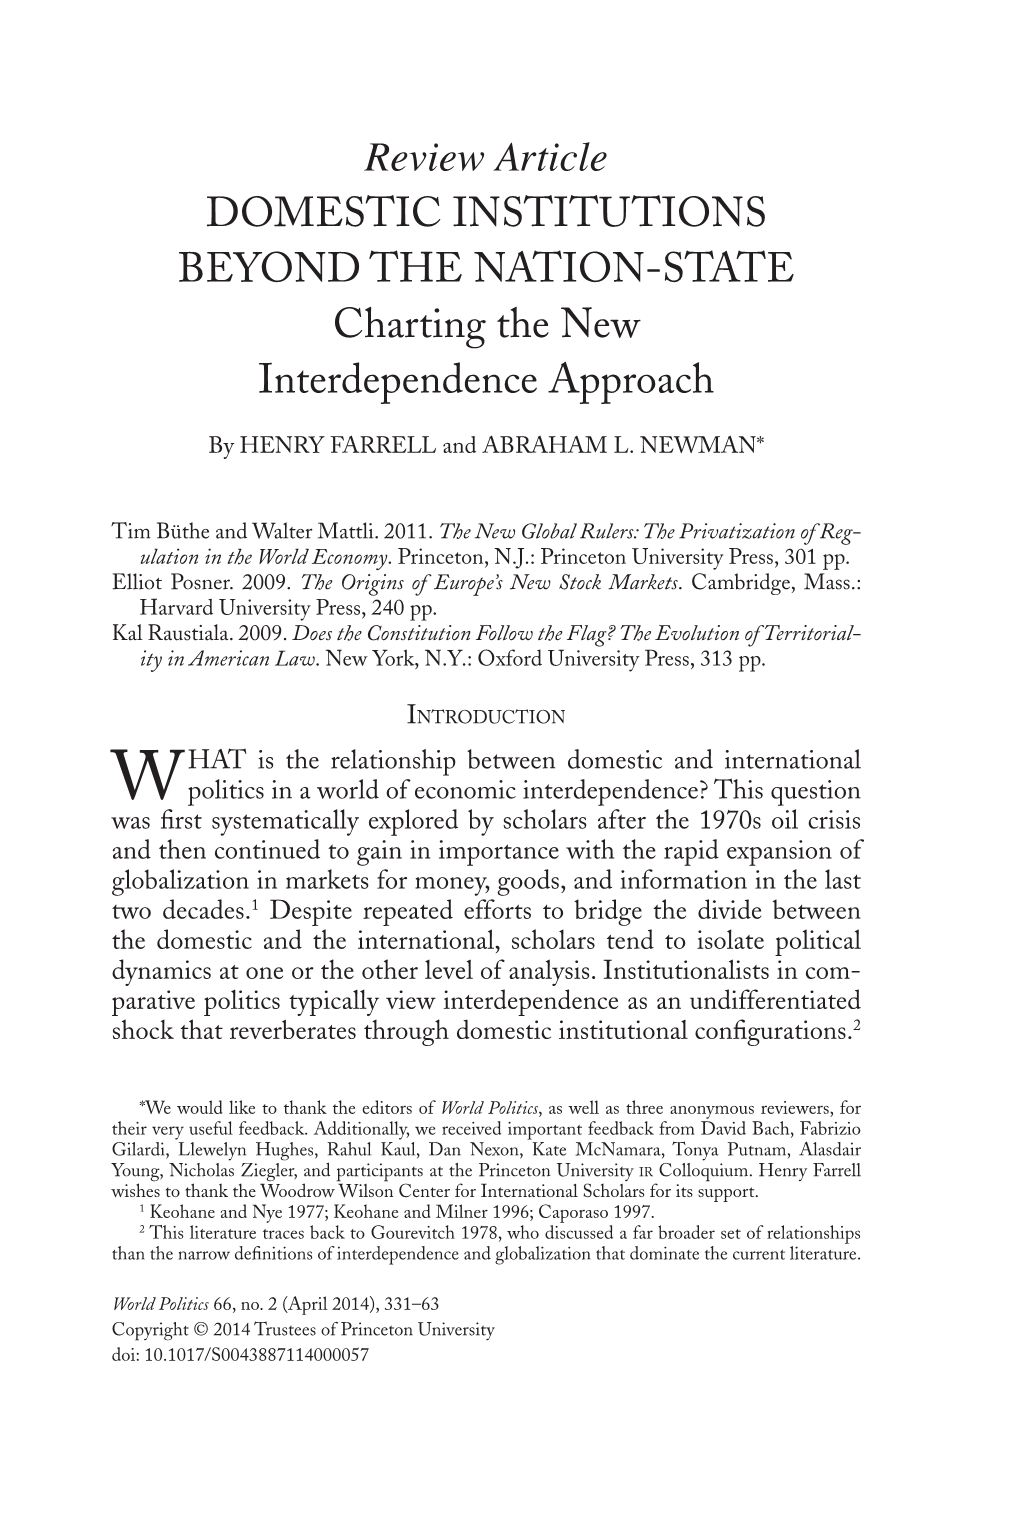 Review Article Domestic Institutions Beyond the Nation-State Charting the New Interdependence Approach